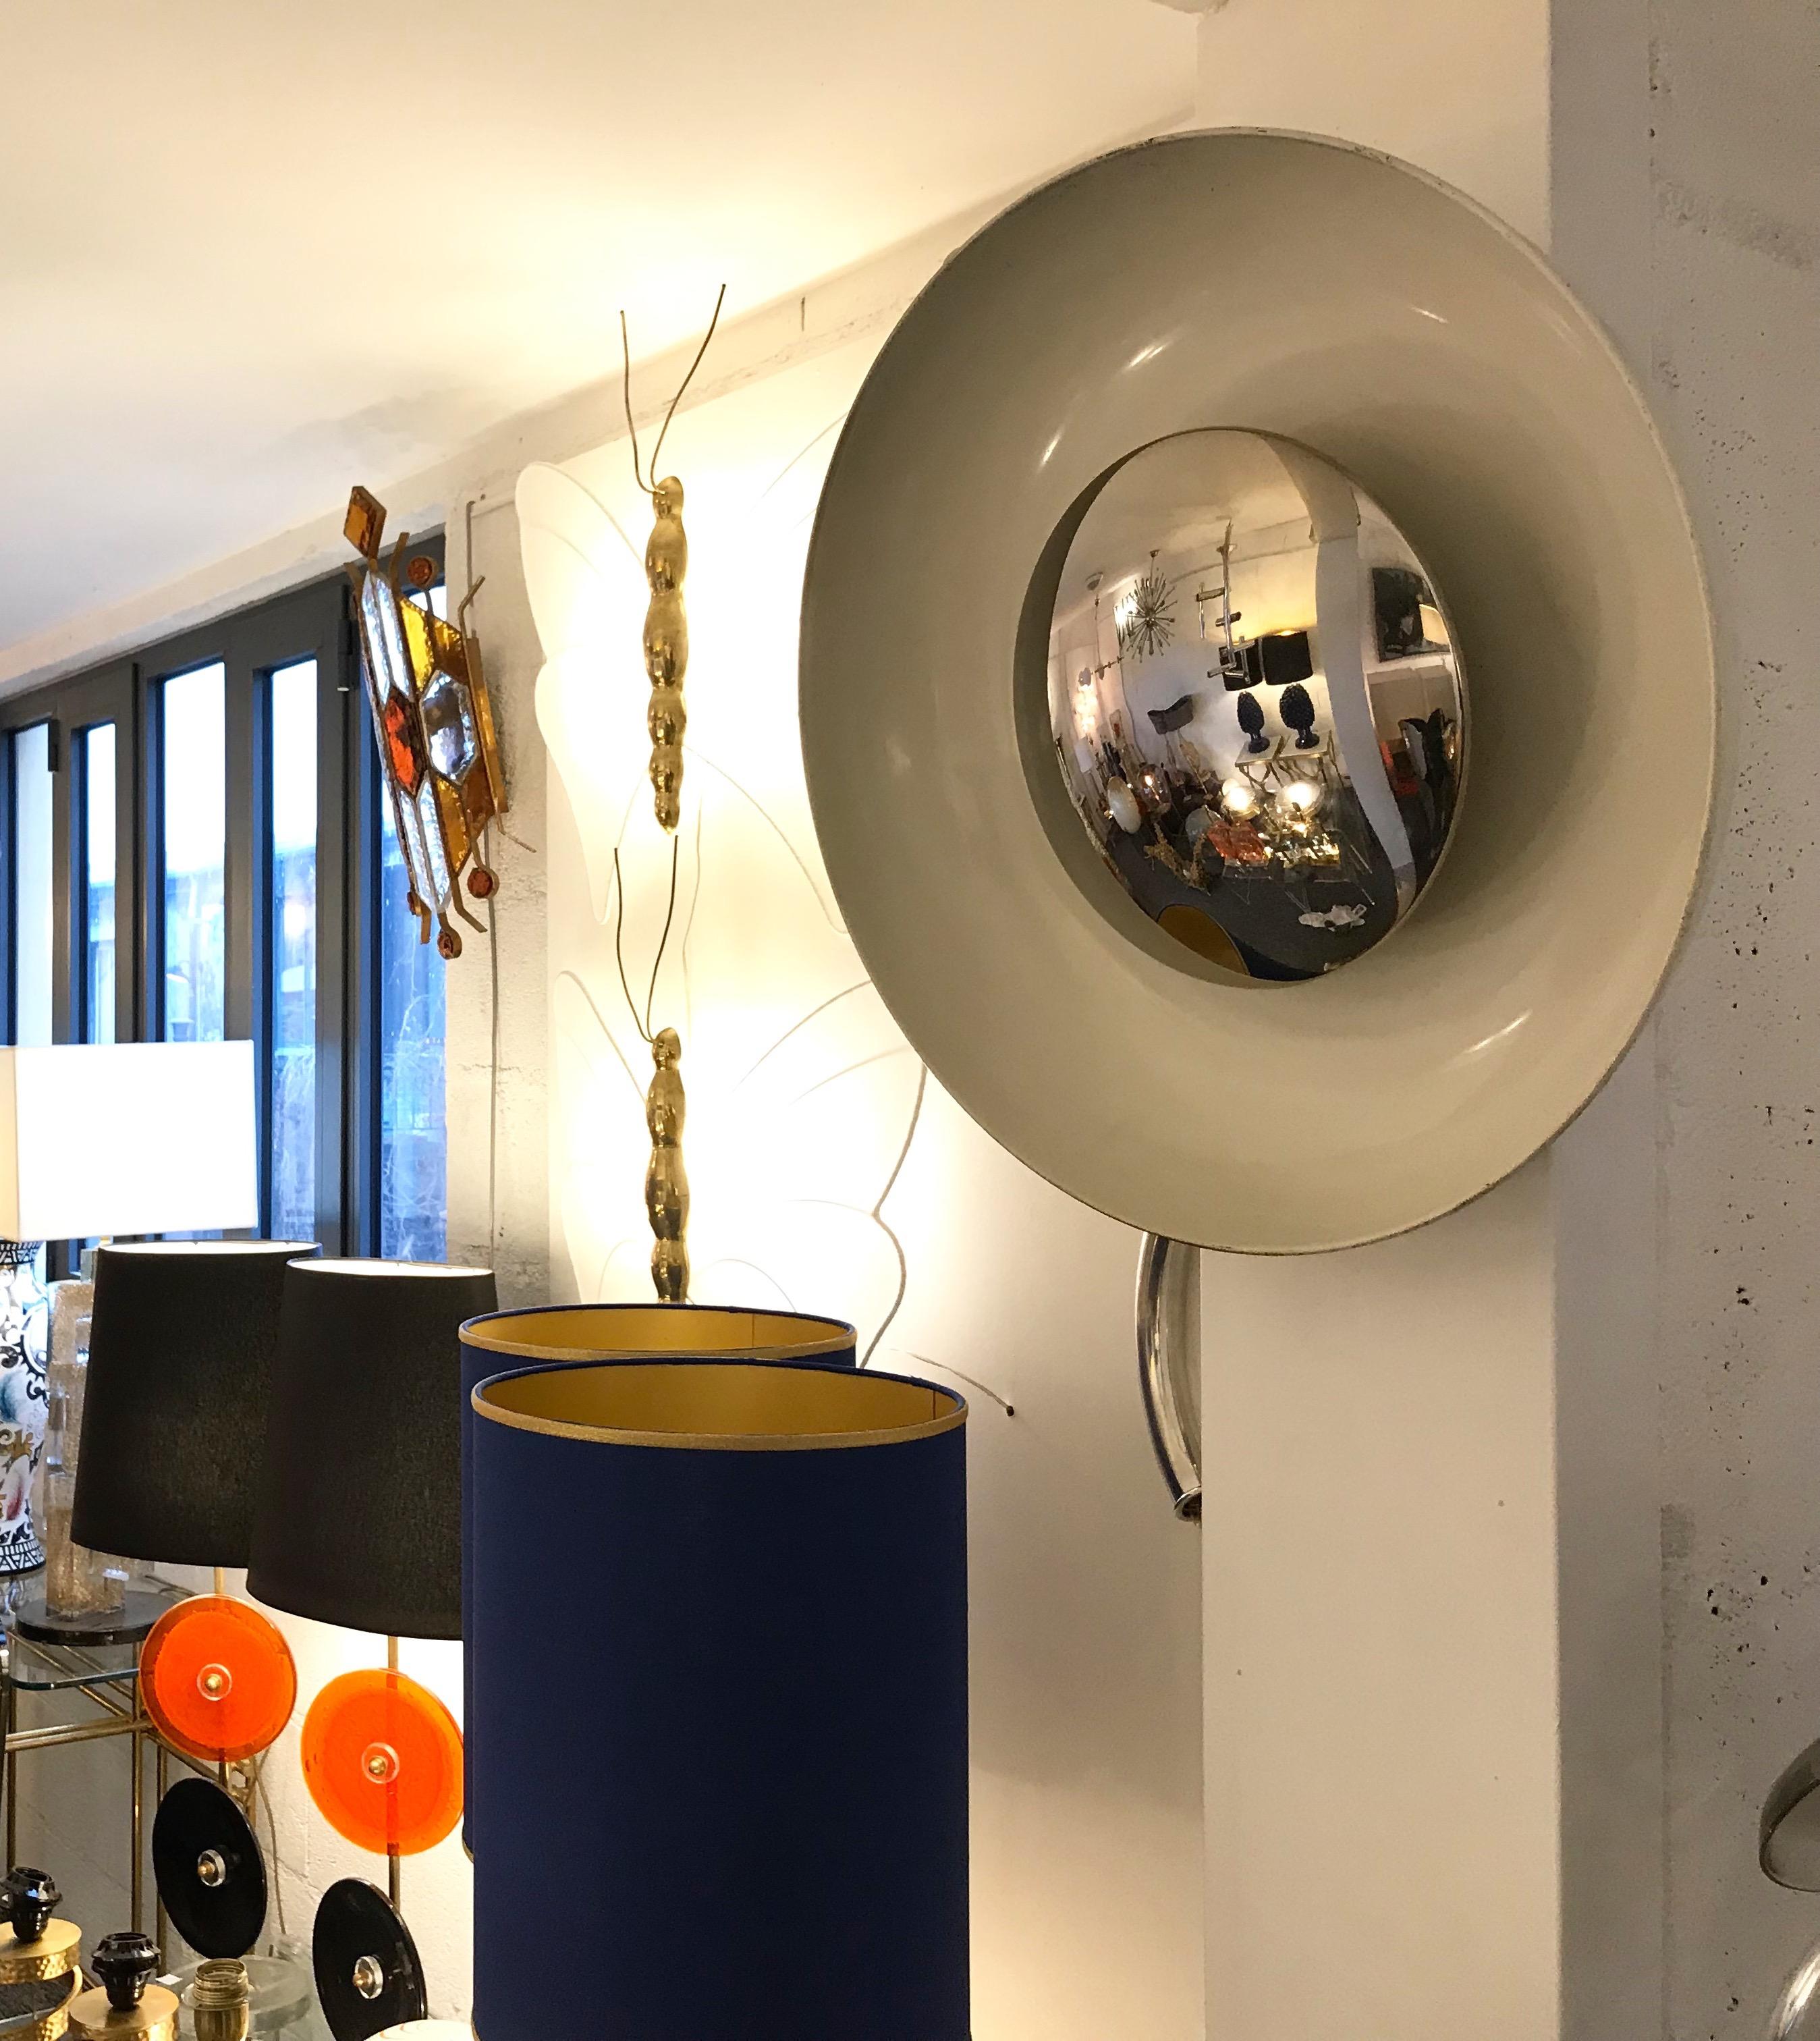 circle white lacquered metal and chrome sconce wall lights or ceiling flush mount chandelier pendants lights by the manufacture Reggiani. Some of them had the original Reggiani stamp. Come from an old cinema in Milan.

1 AVAILABLE